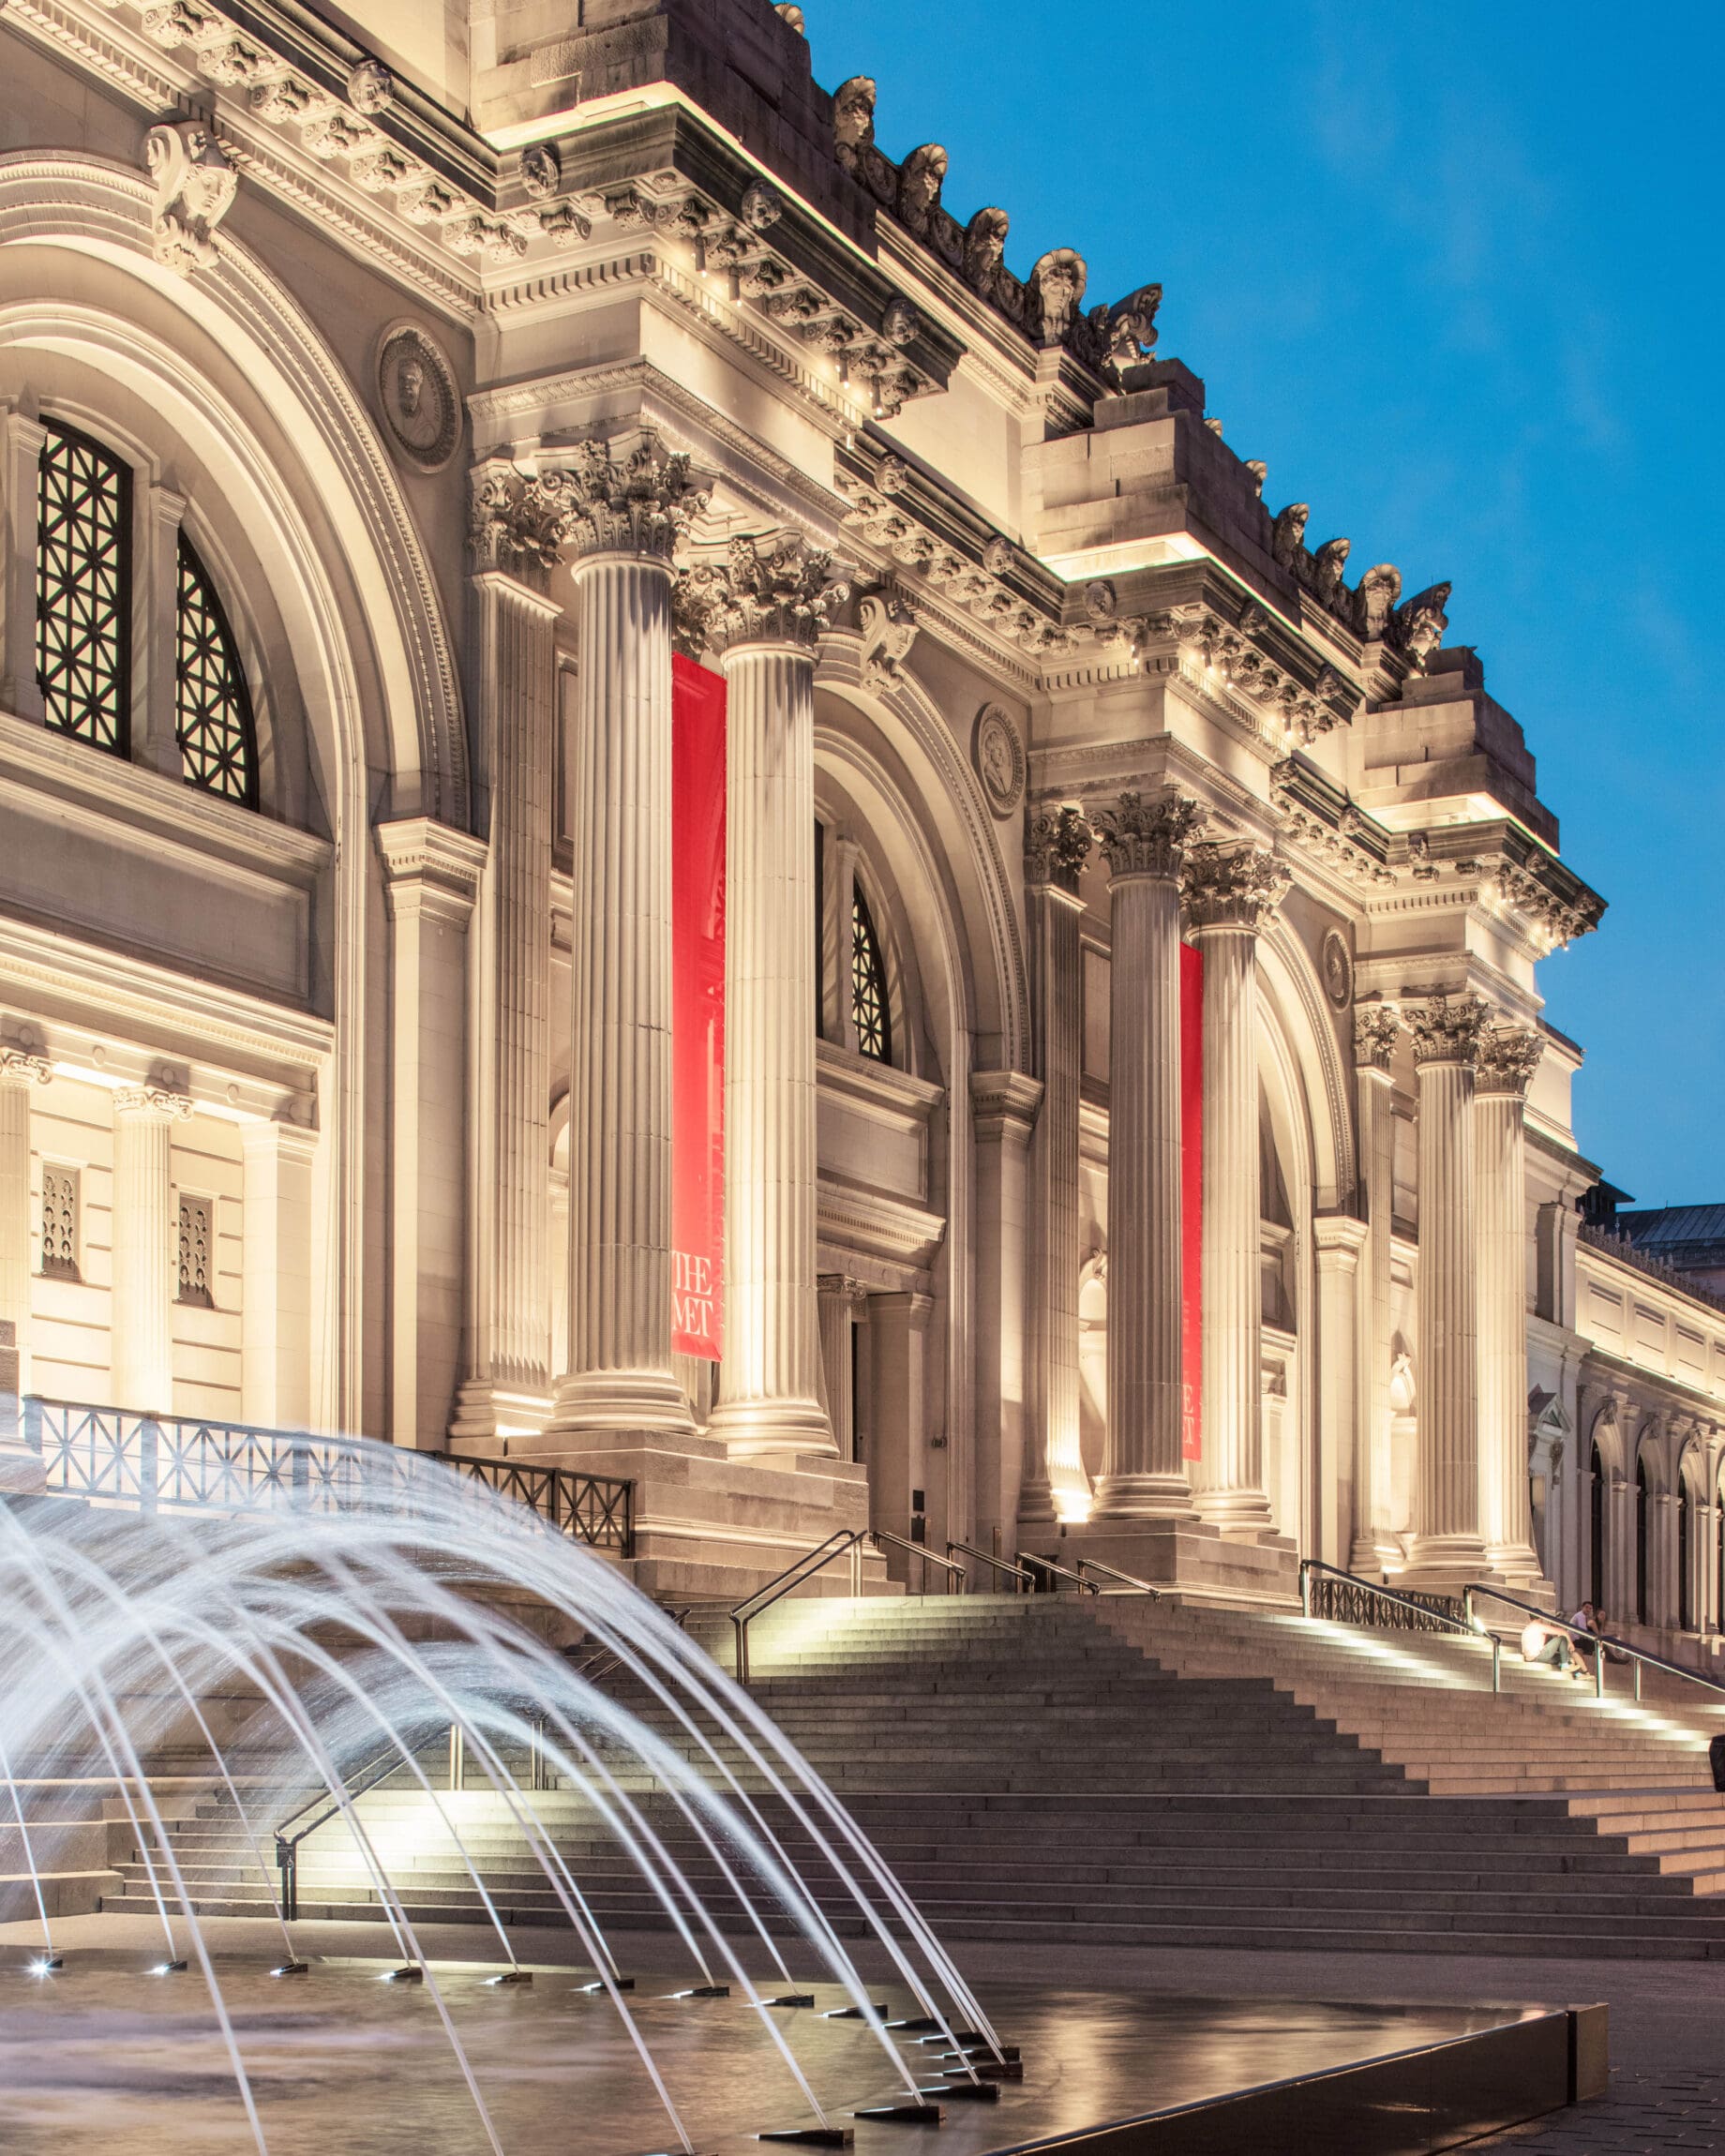 The best art galleries and museums in New York City | Exterior of the steps up to The Metropolitan Museum of Art